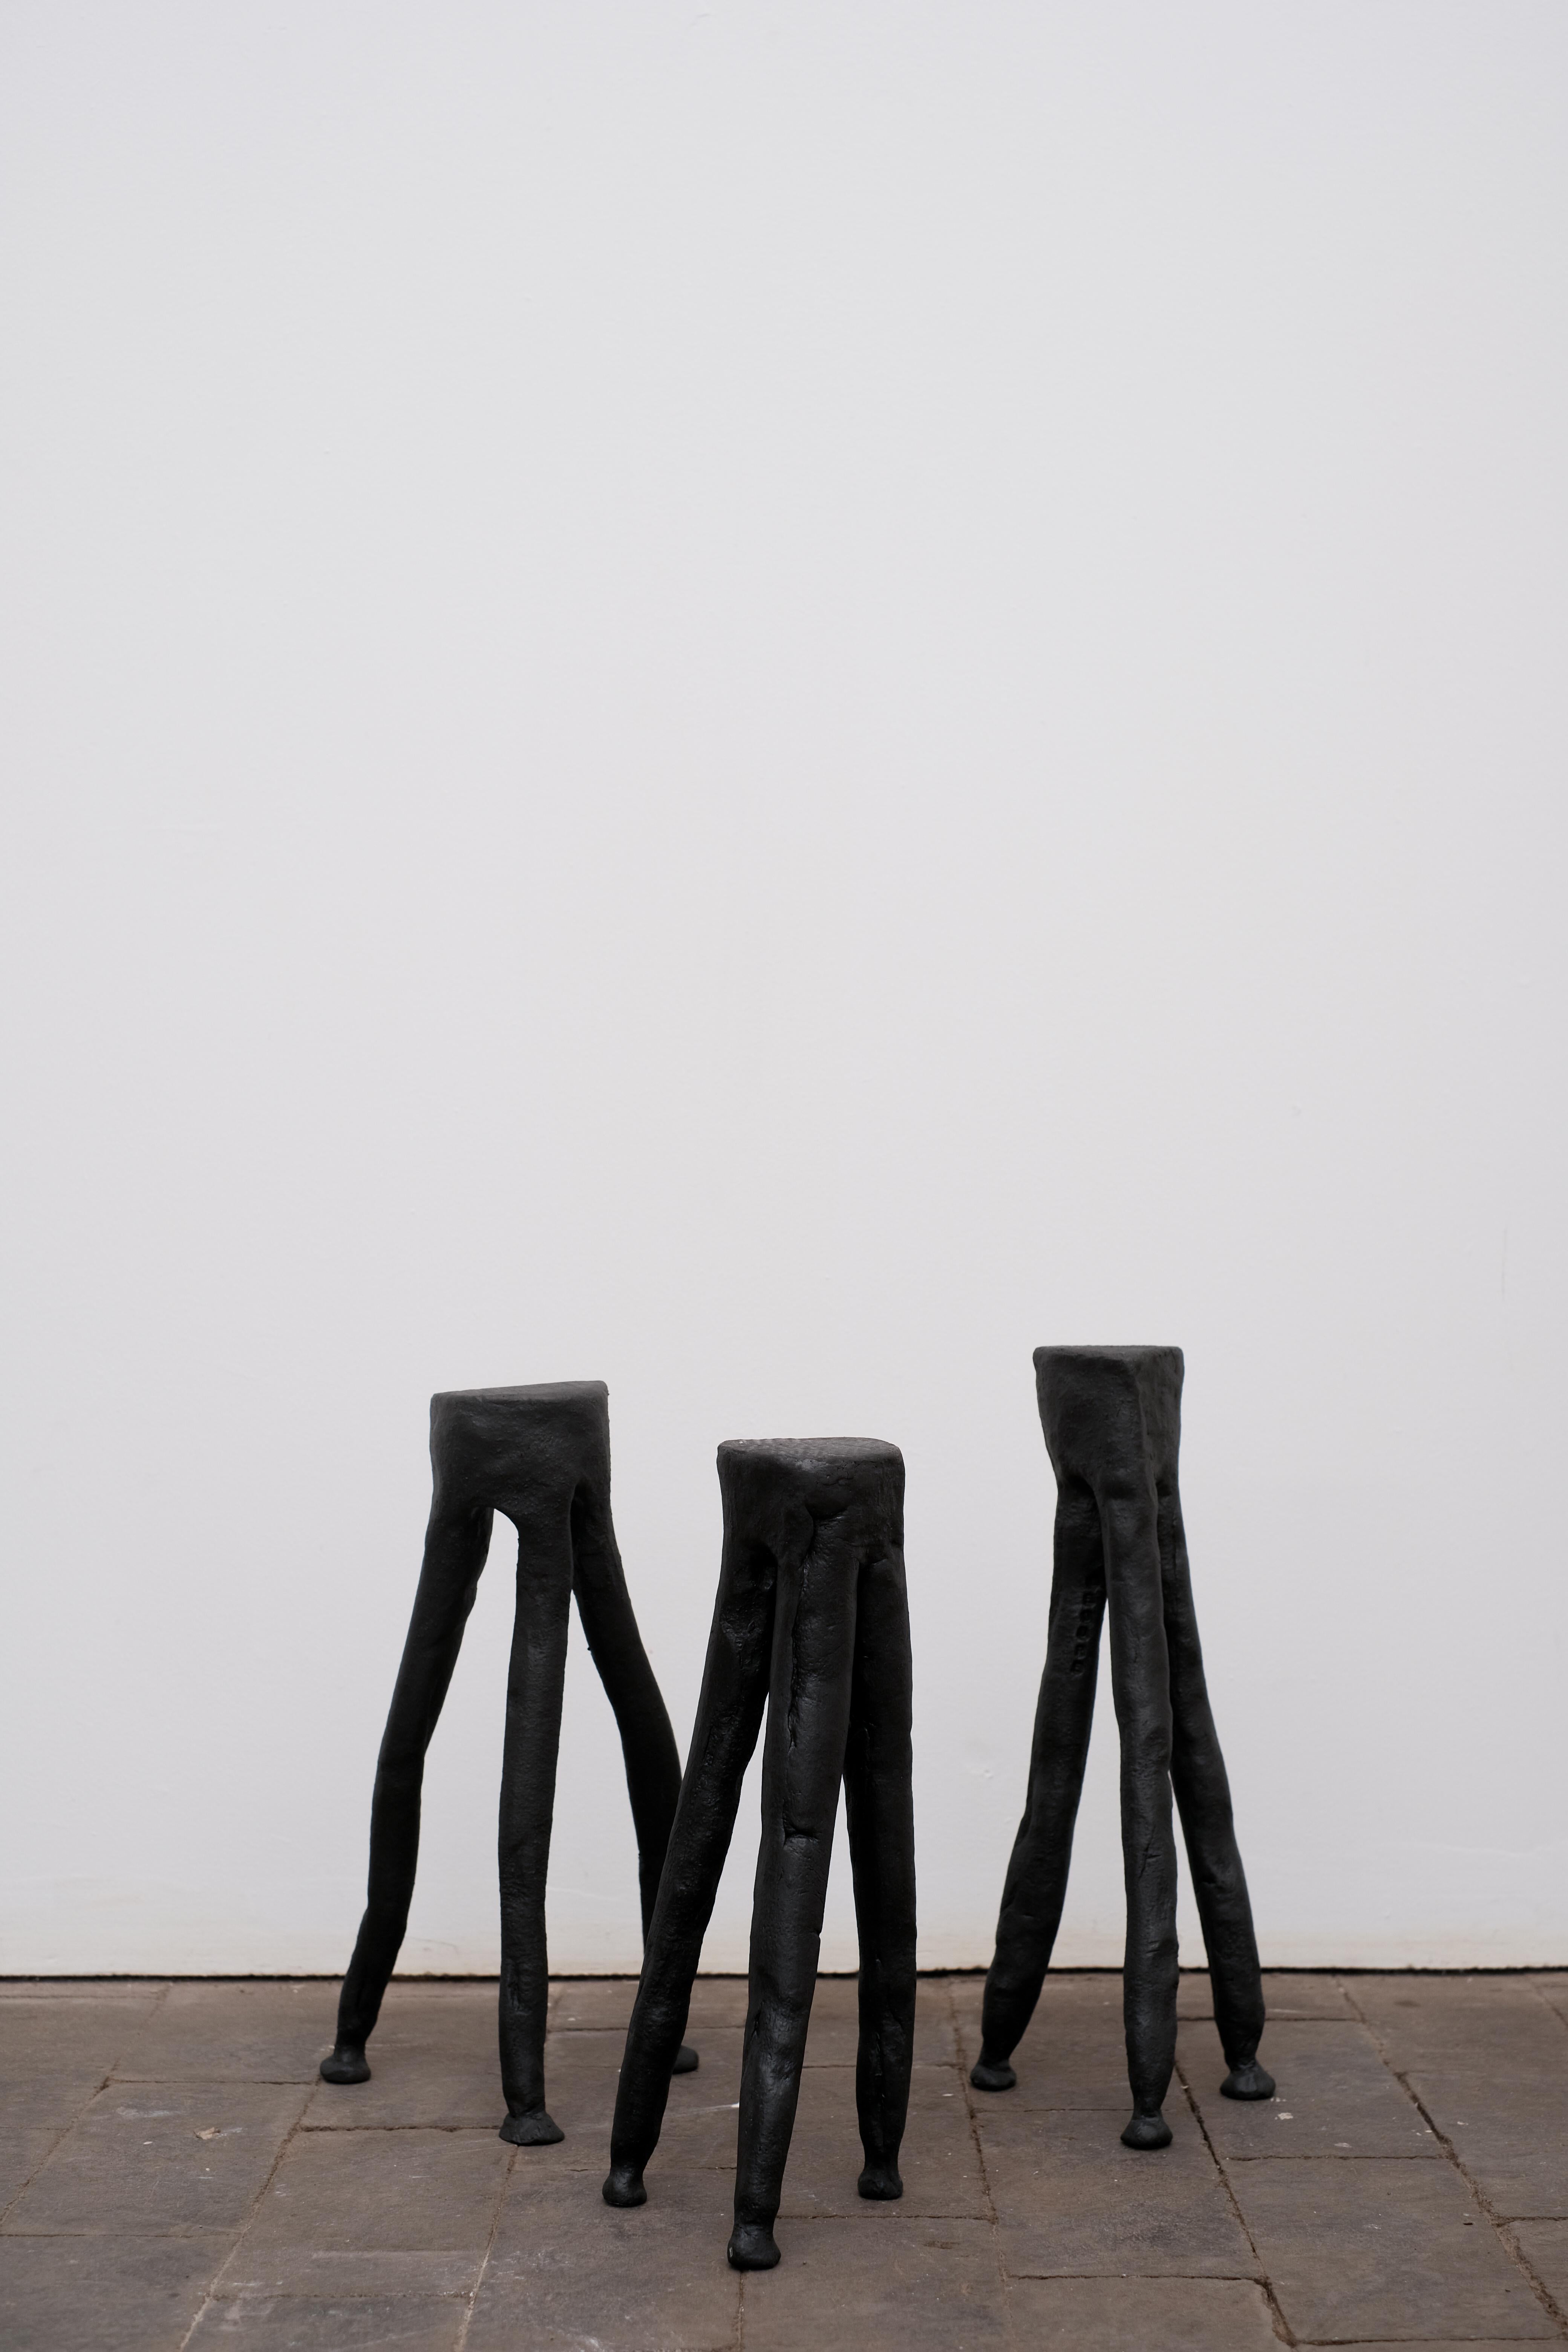 Tripod sculpture by Atelier Ledure
Dimensions: W 15 x D 15 x H 35 cm
Materials: Ceramics - stoneware
Also Available: Other variations available.

Each piece is handmade and can show irregularities. These signify the beauty of the